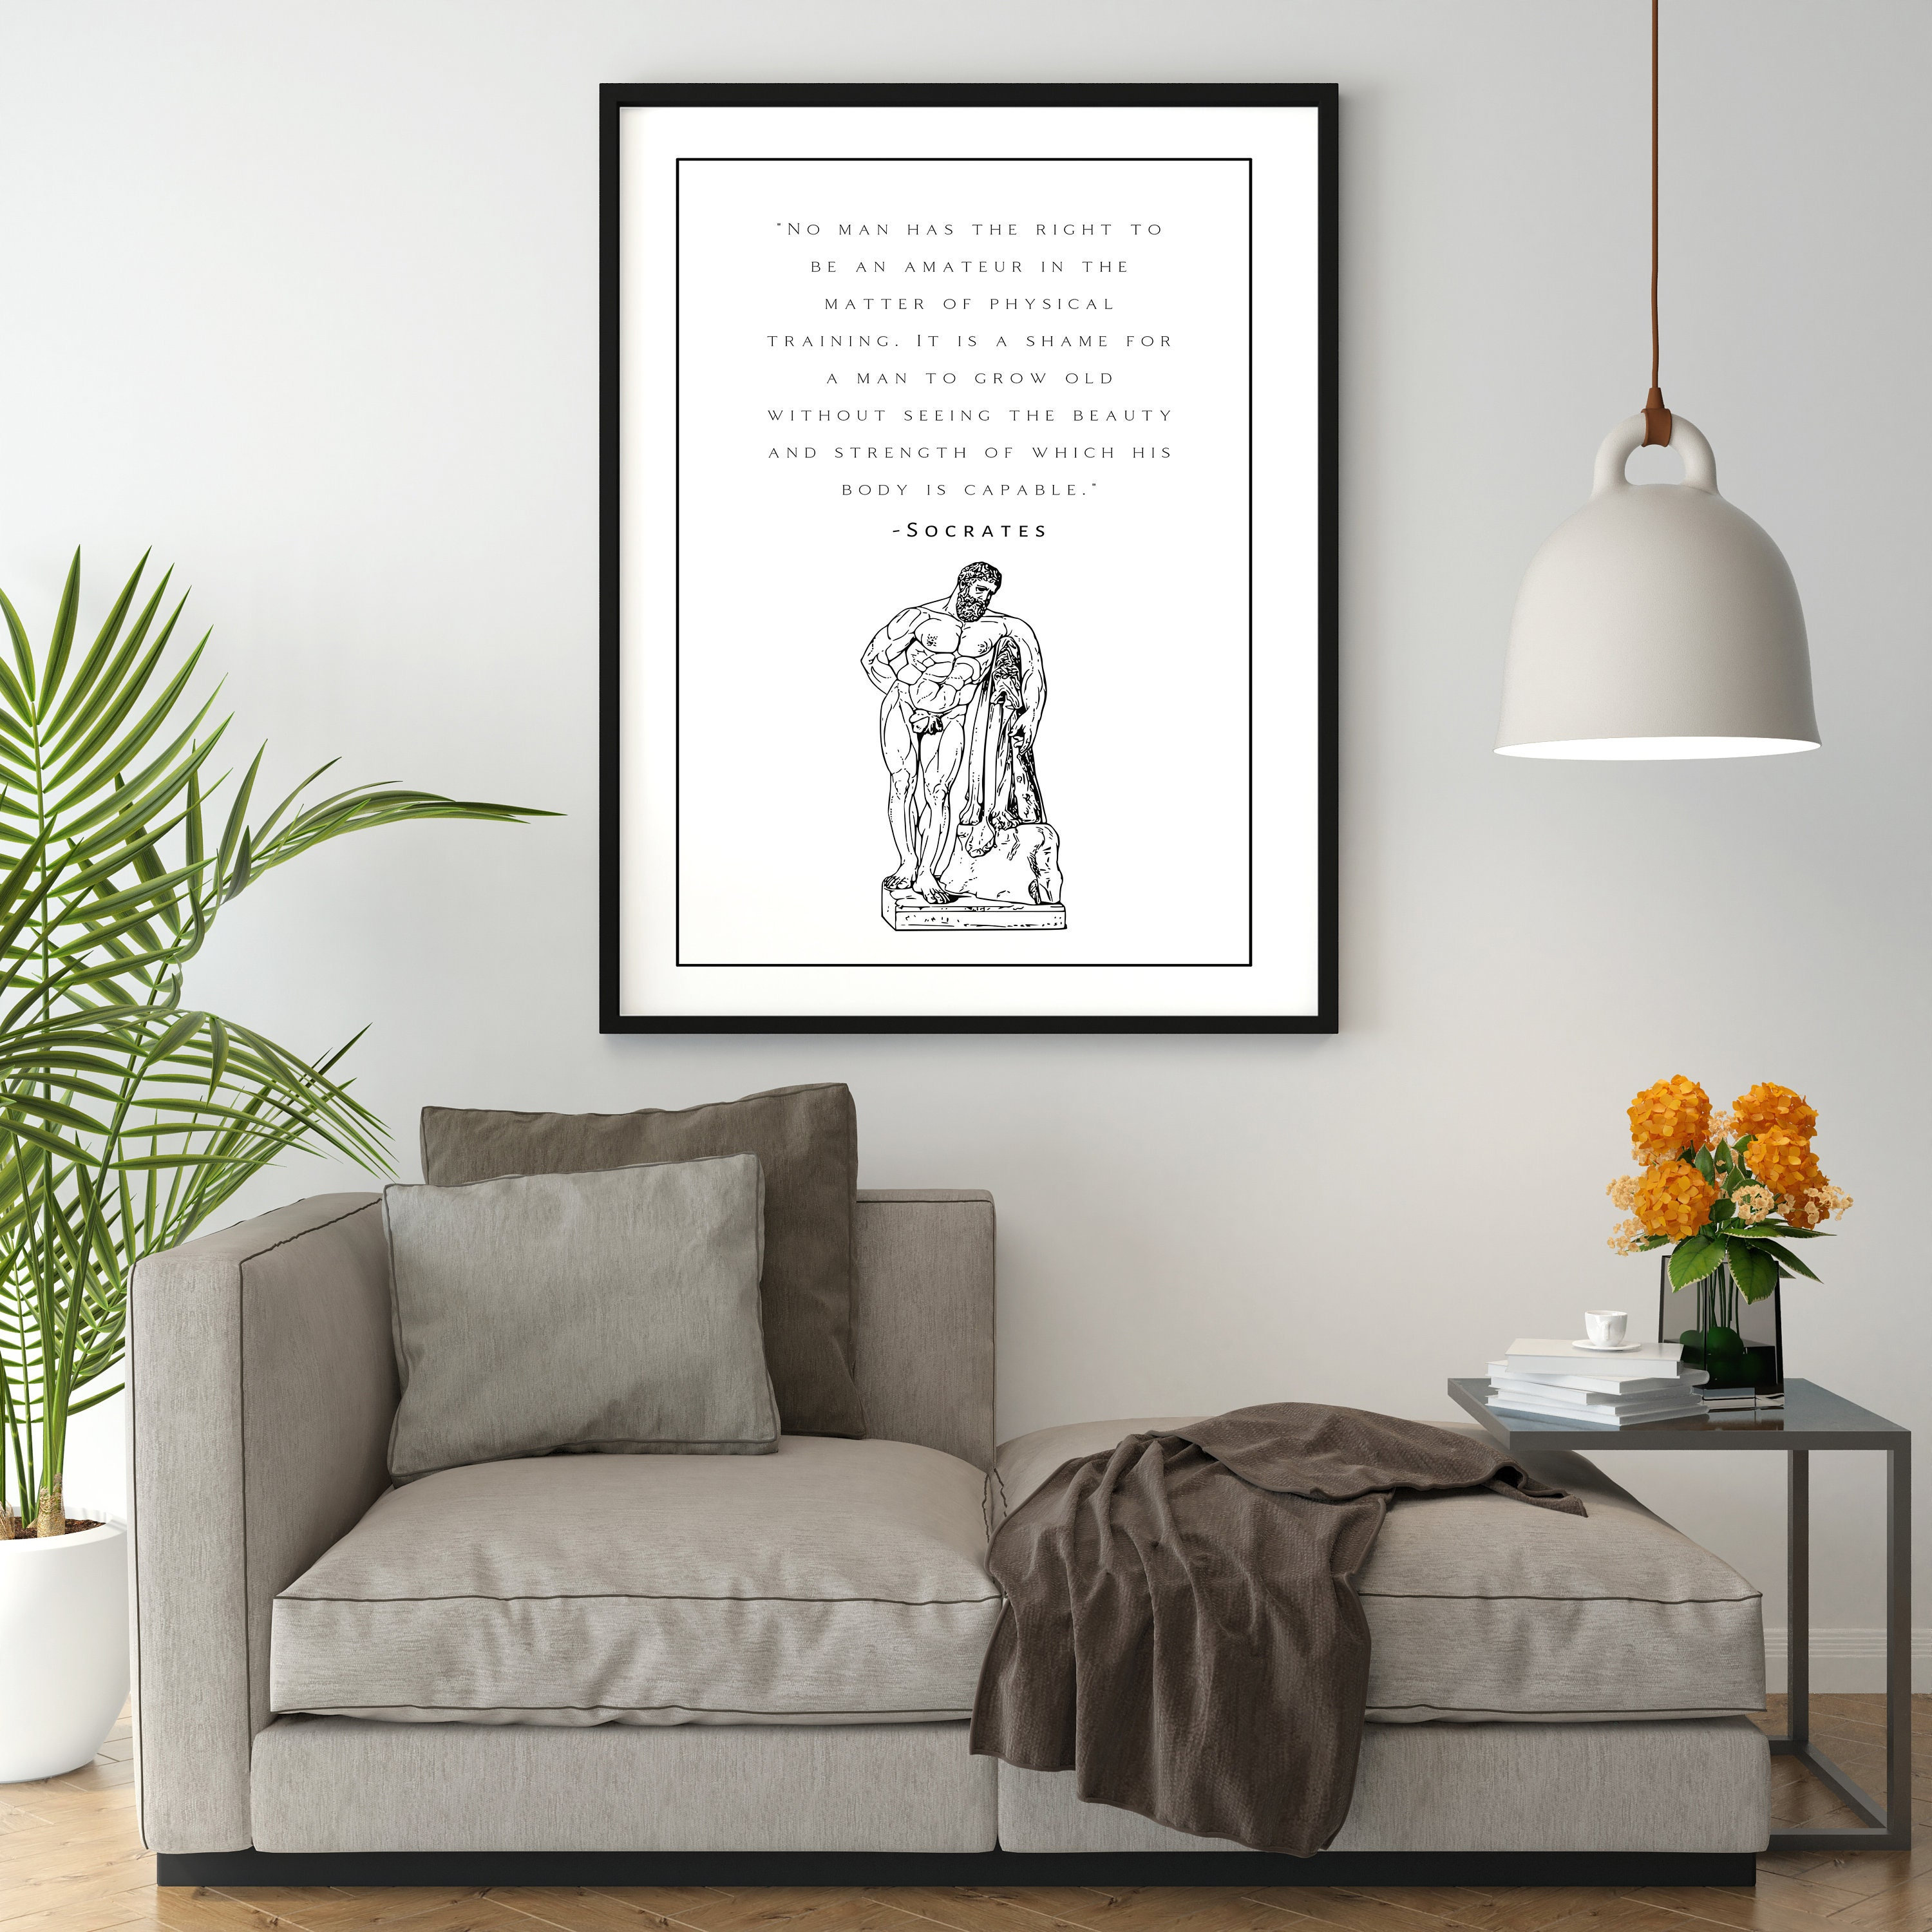 Socrates Poem Posters Motivational Quote Art Print Poetry pic